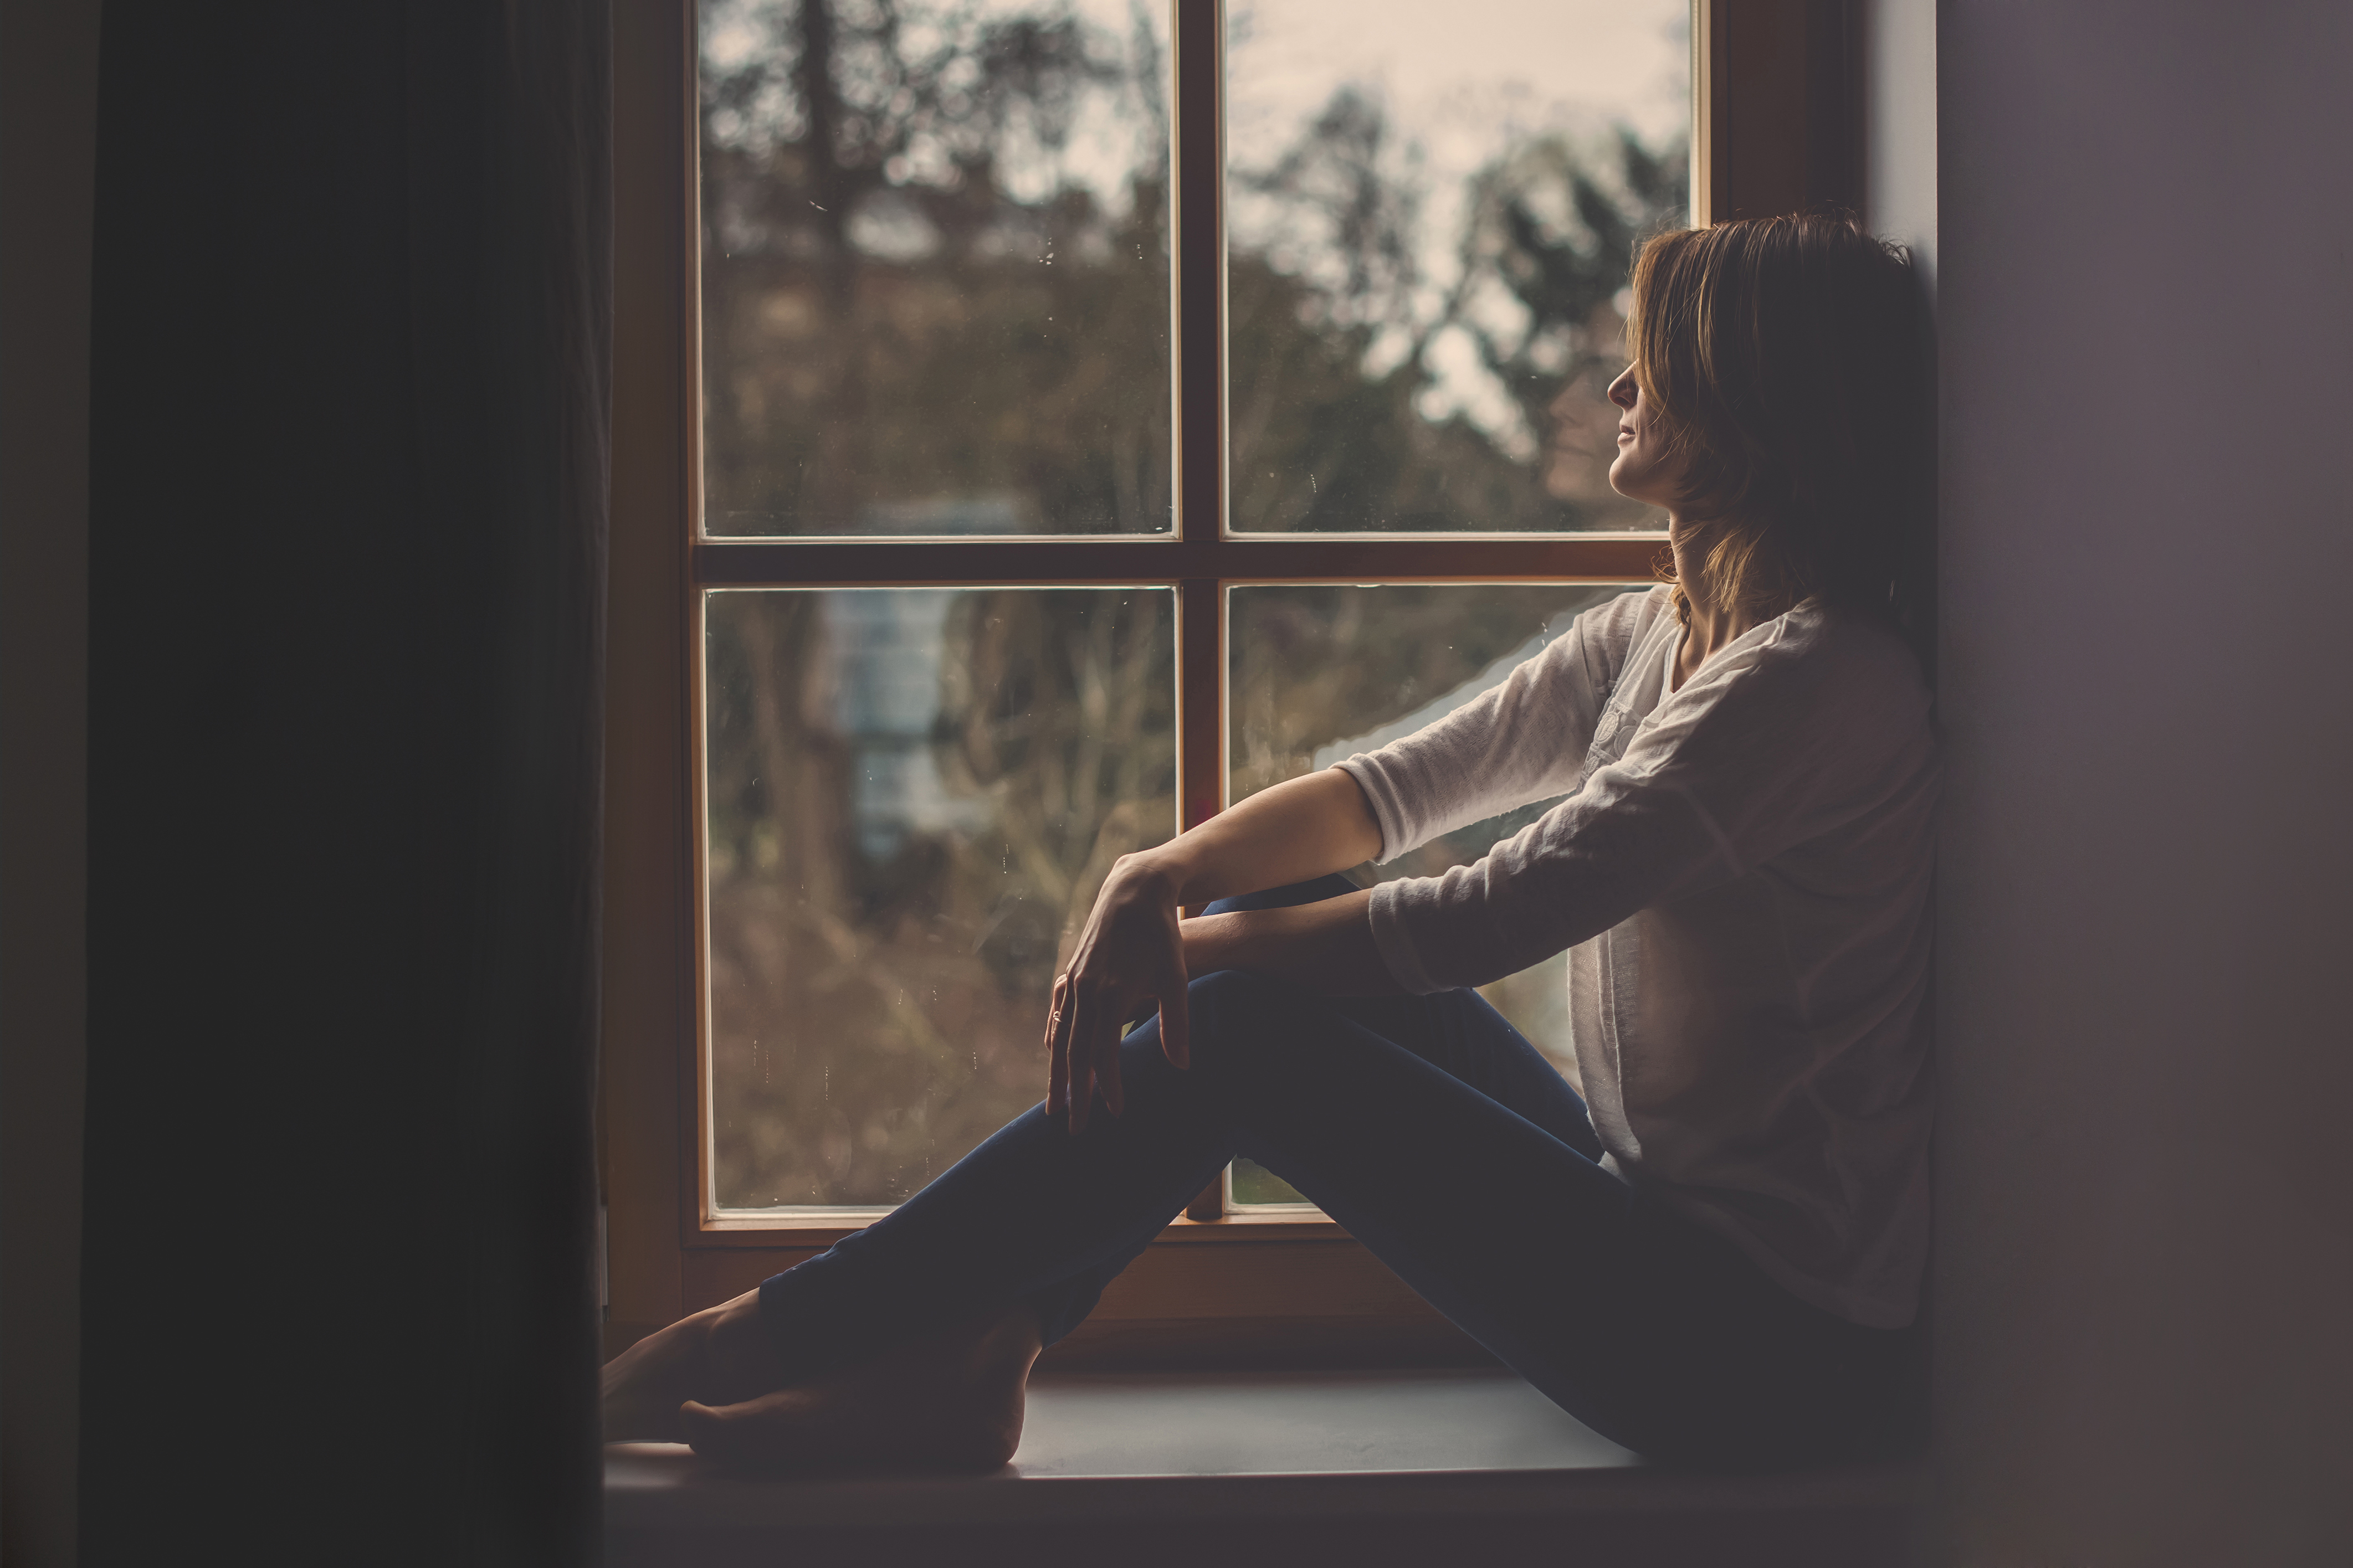 Lonely woman sitting by the window | Source: Shutterstock